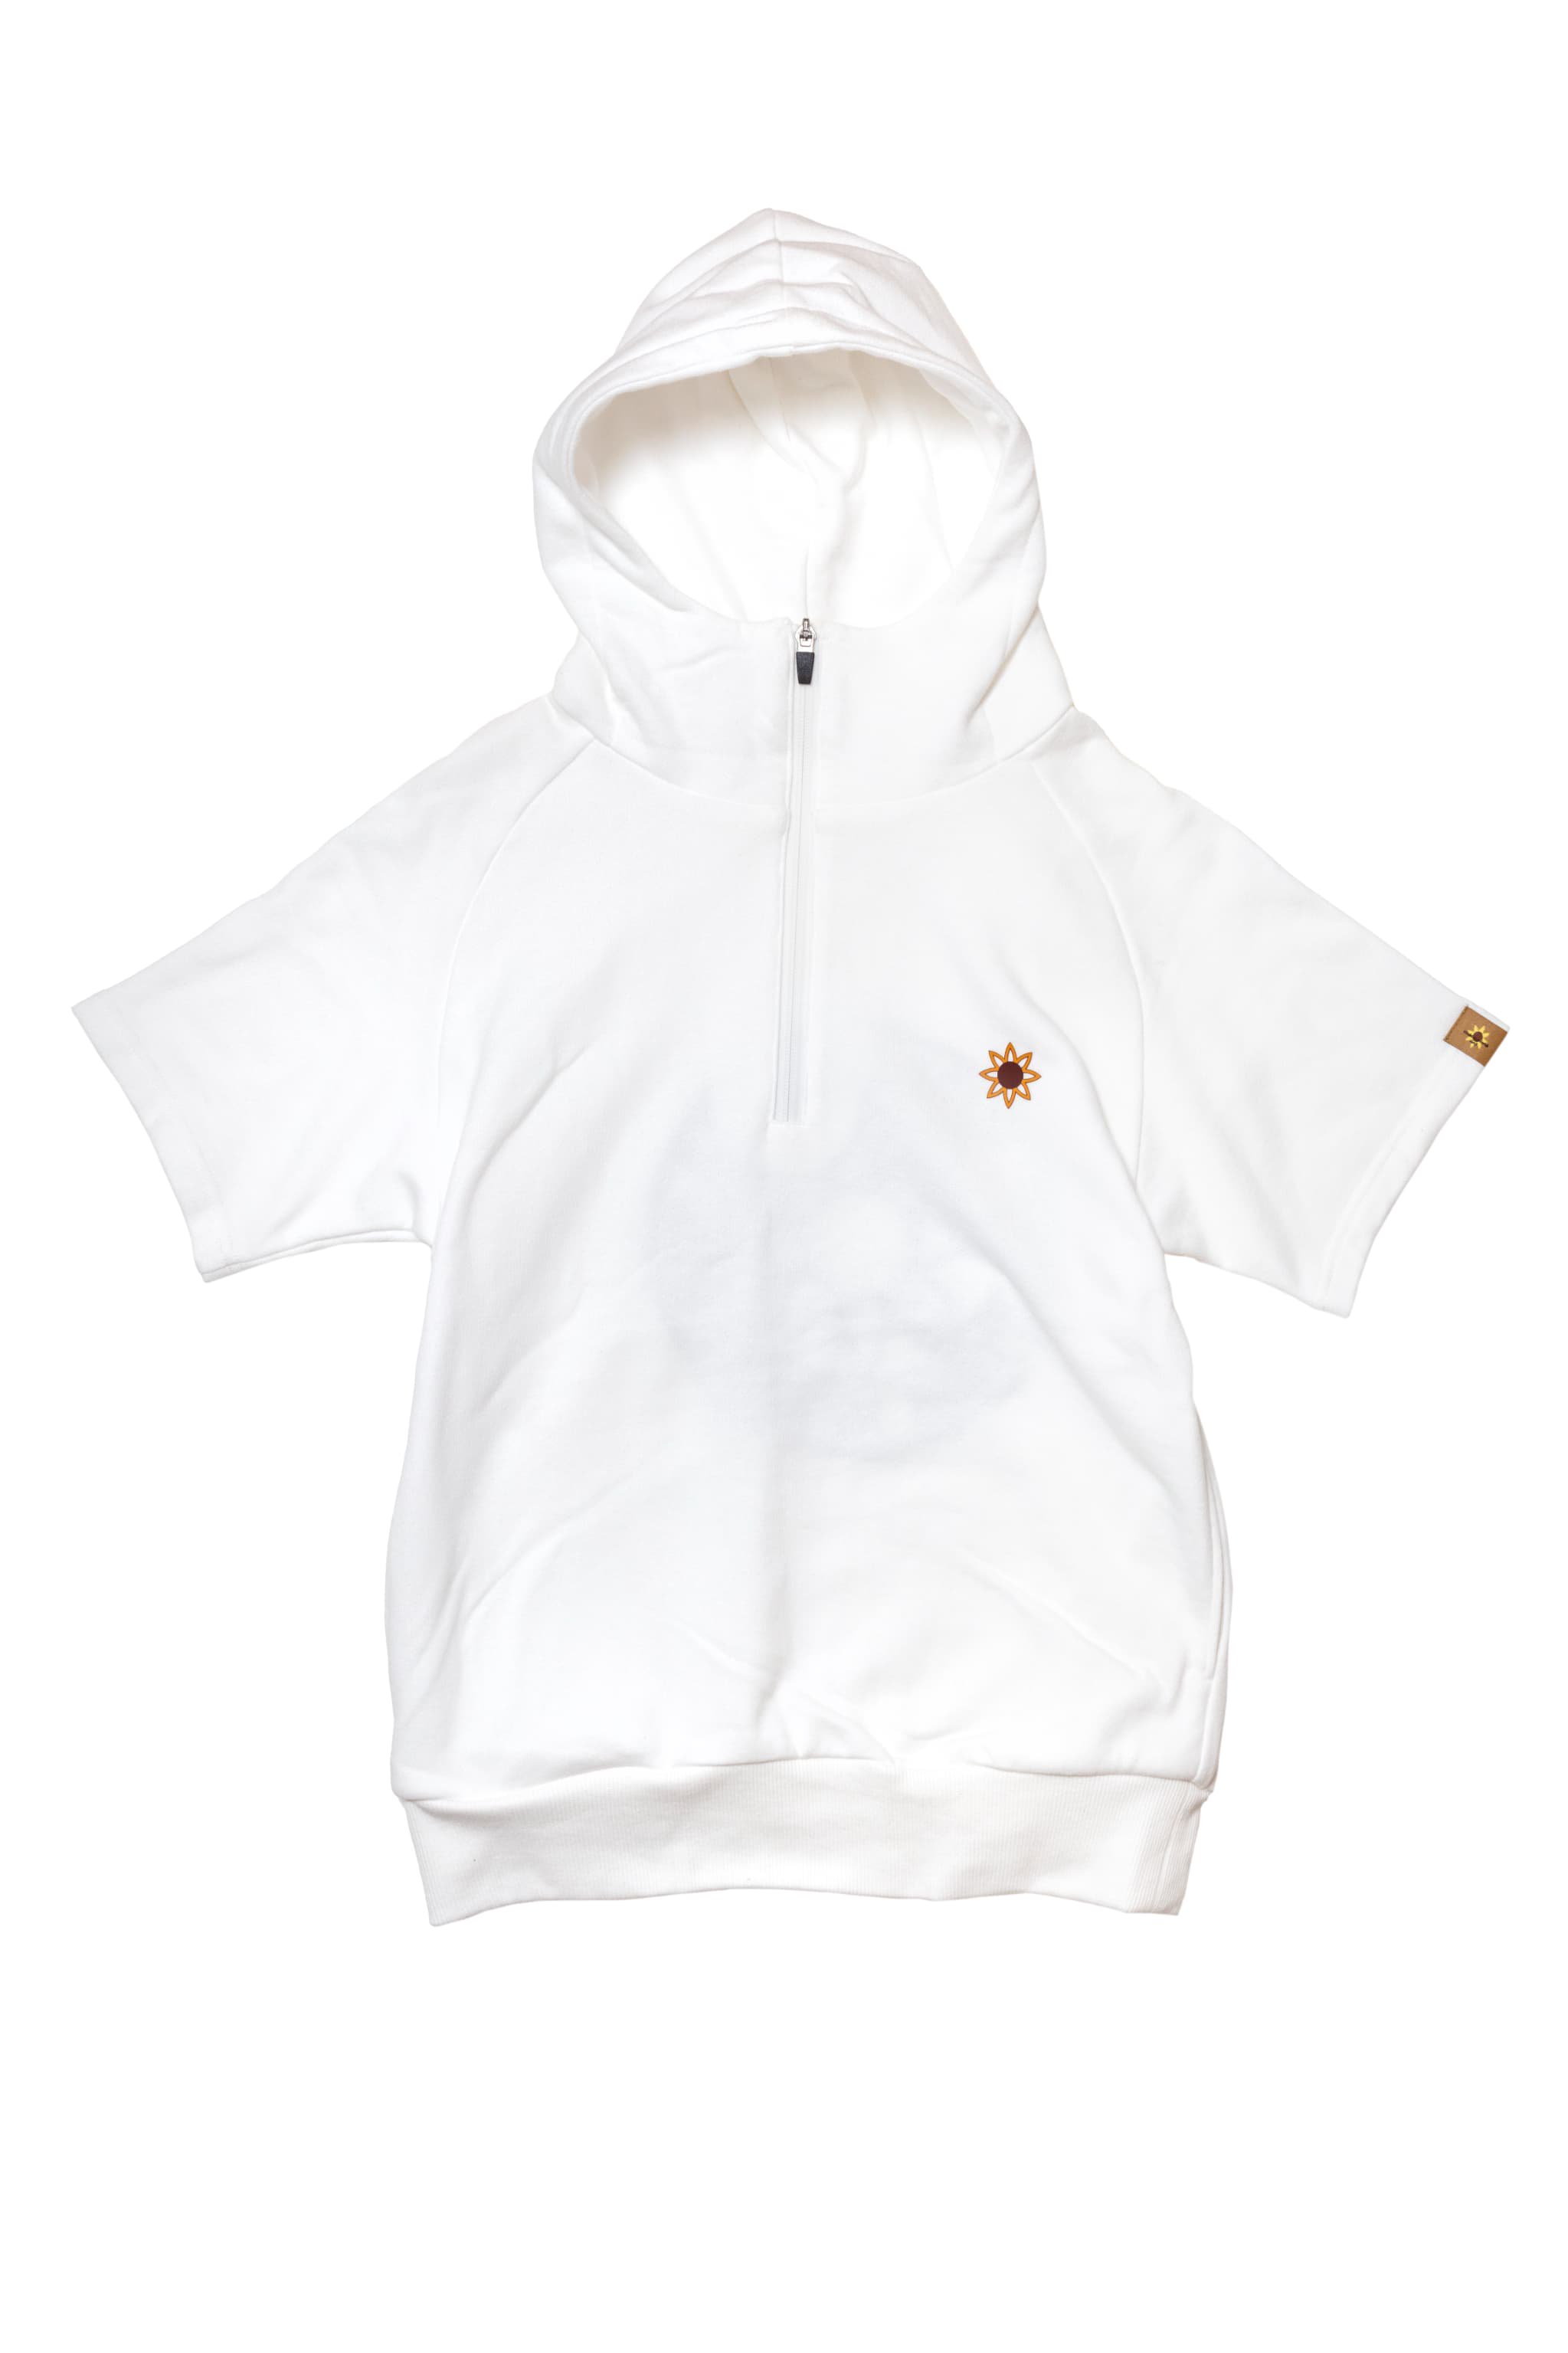 <img class='new_mark_img1' src='https://img.shop-pro.jp/img/new/icons50.gif' style='border:none;display:inline;margin:0px;padding:0px;width:auto;' />HALF ZIP PARKA<br />white